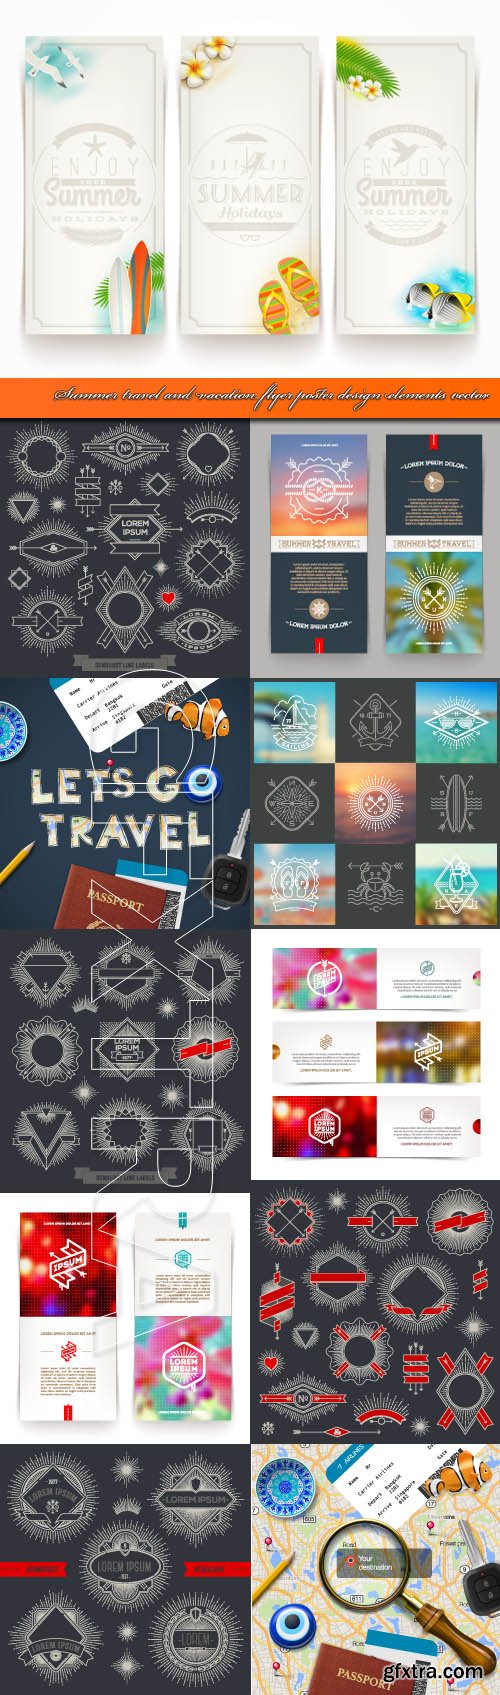 Summer travel and vacation flyer poster design elements vector